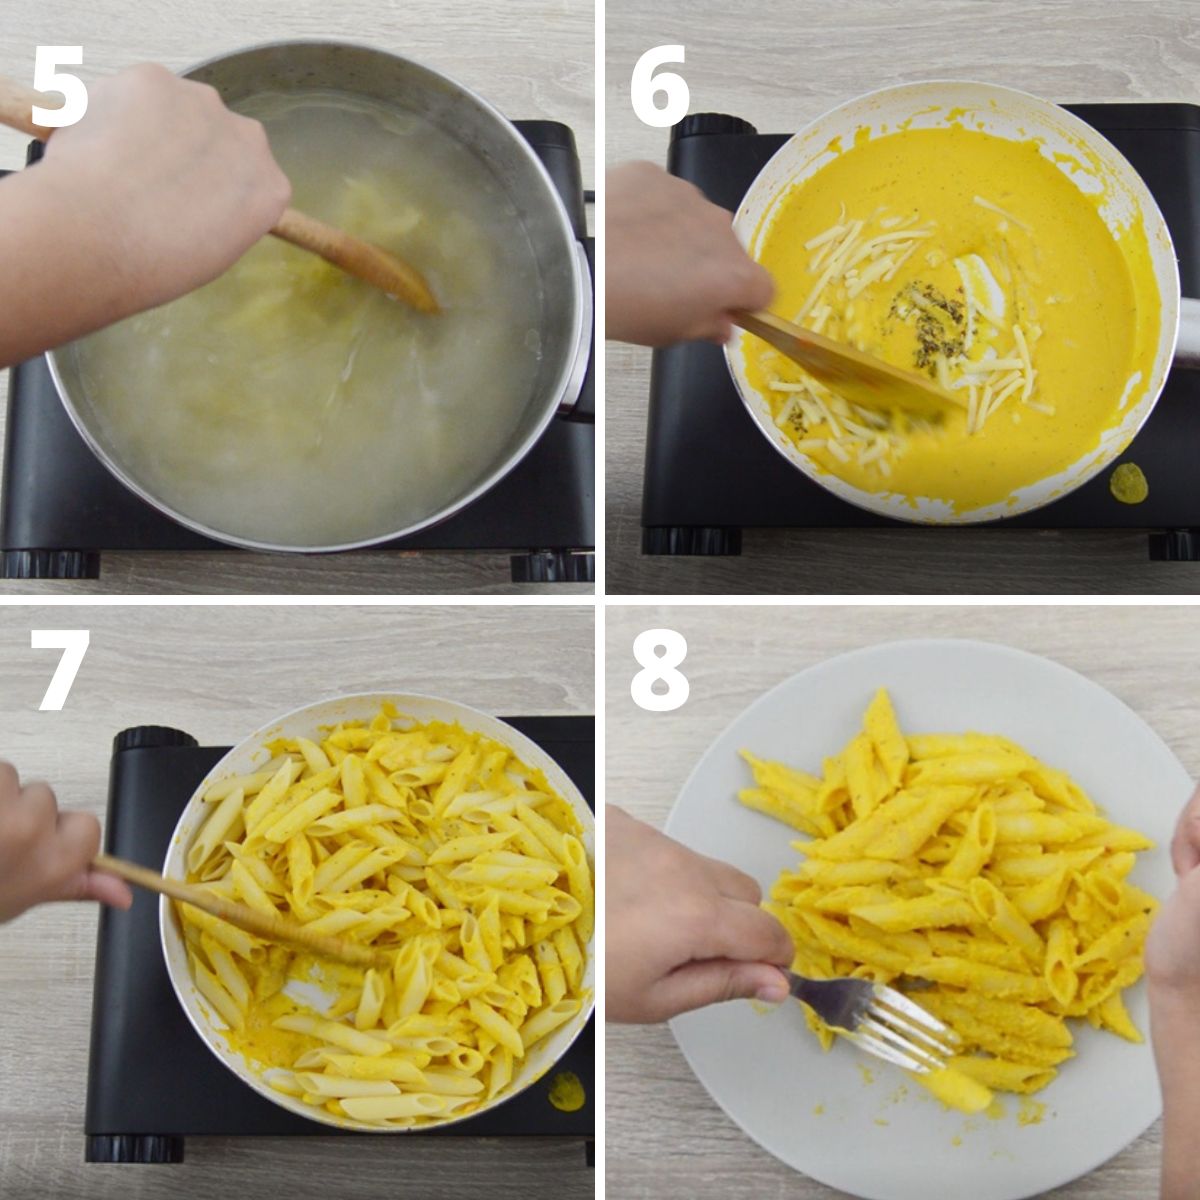 college of 4 images with top left image of cooking pasta in water, top right image of stirring carrot sauce in a white pan, bottom left image of mixing pasta in the sauce and bottom right image of picking carrot pasta from a plate with a fork.